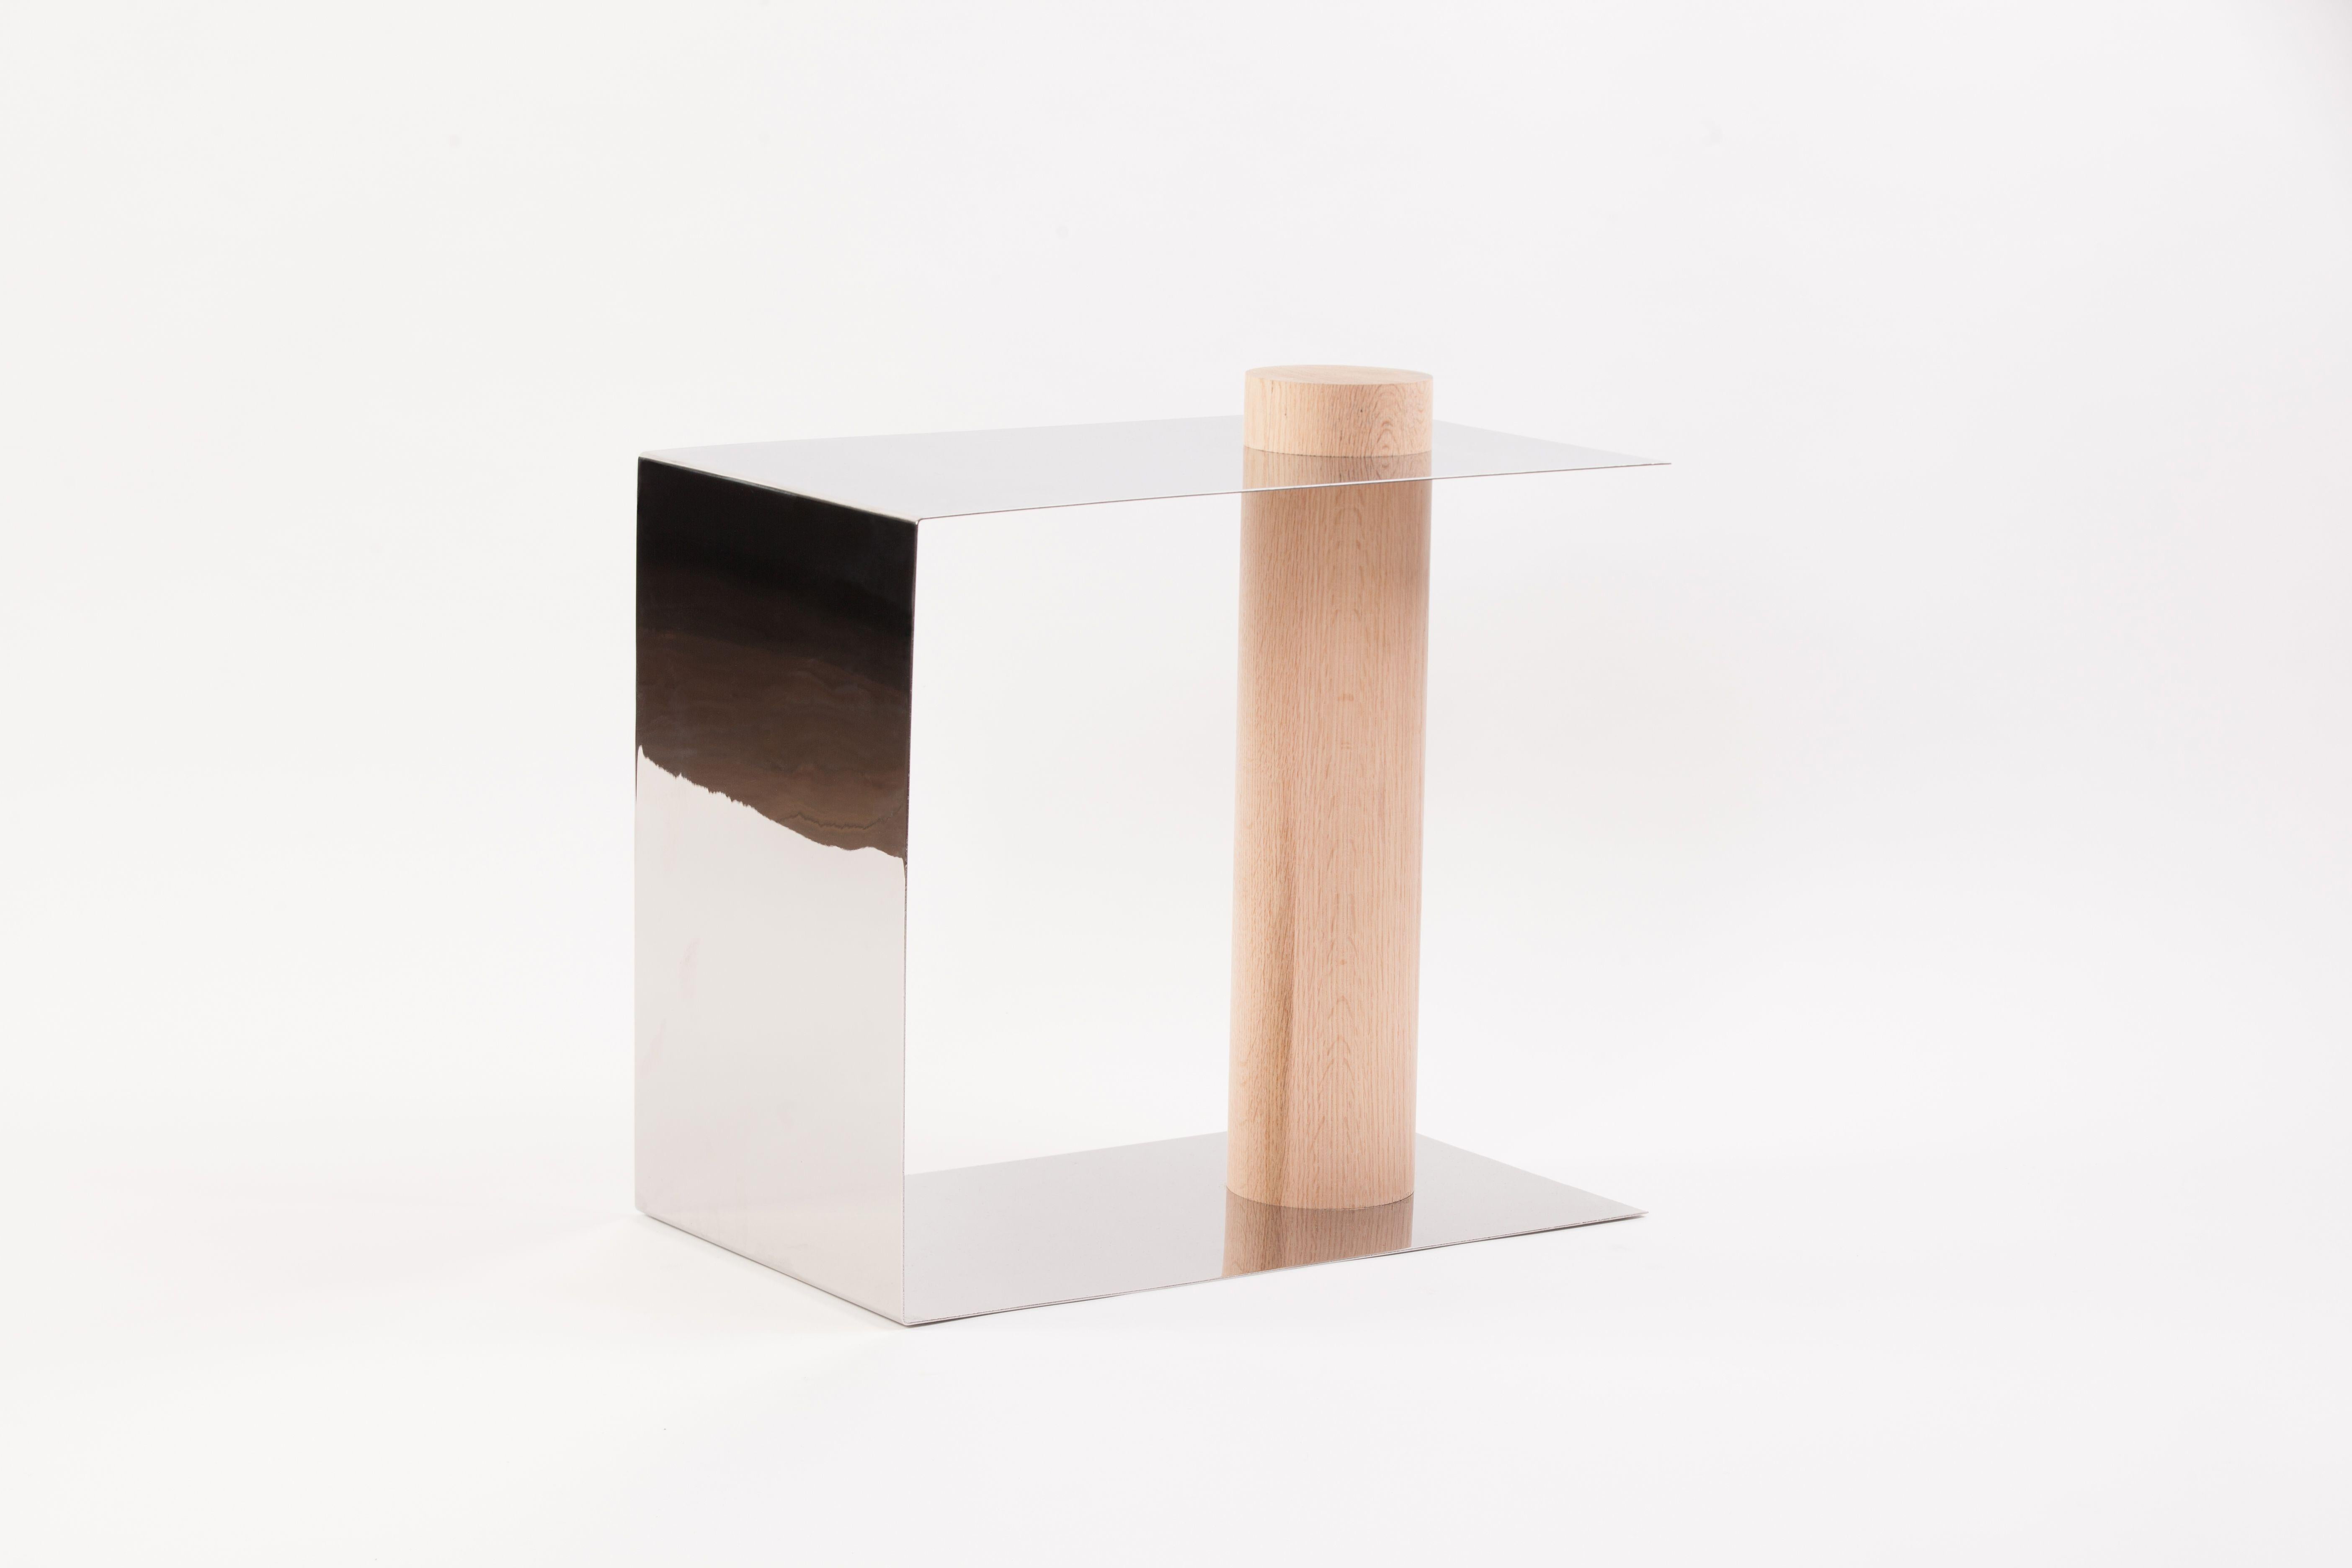 Puru dide table by Estudio Persona
Dimensions: W 53.3 x D 30.5 x H 45.7 cm
Materials: Stainless steel, white oak

Side table made of polished stainless steel and solid white oak.
Customizations available.


Estudio Persona was created by